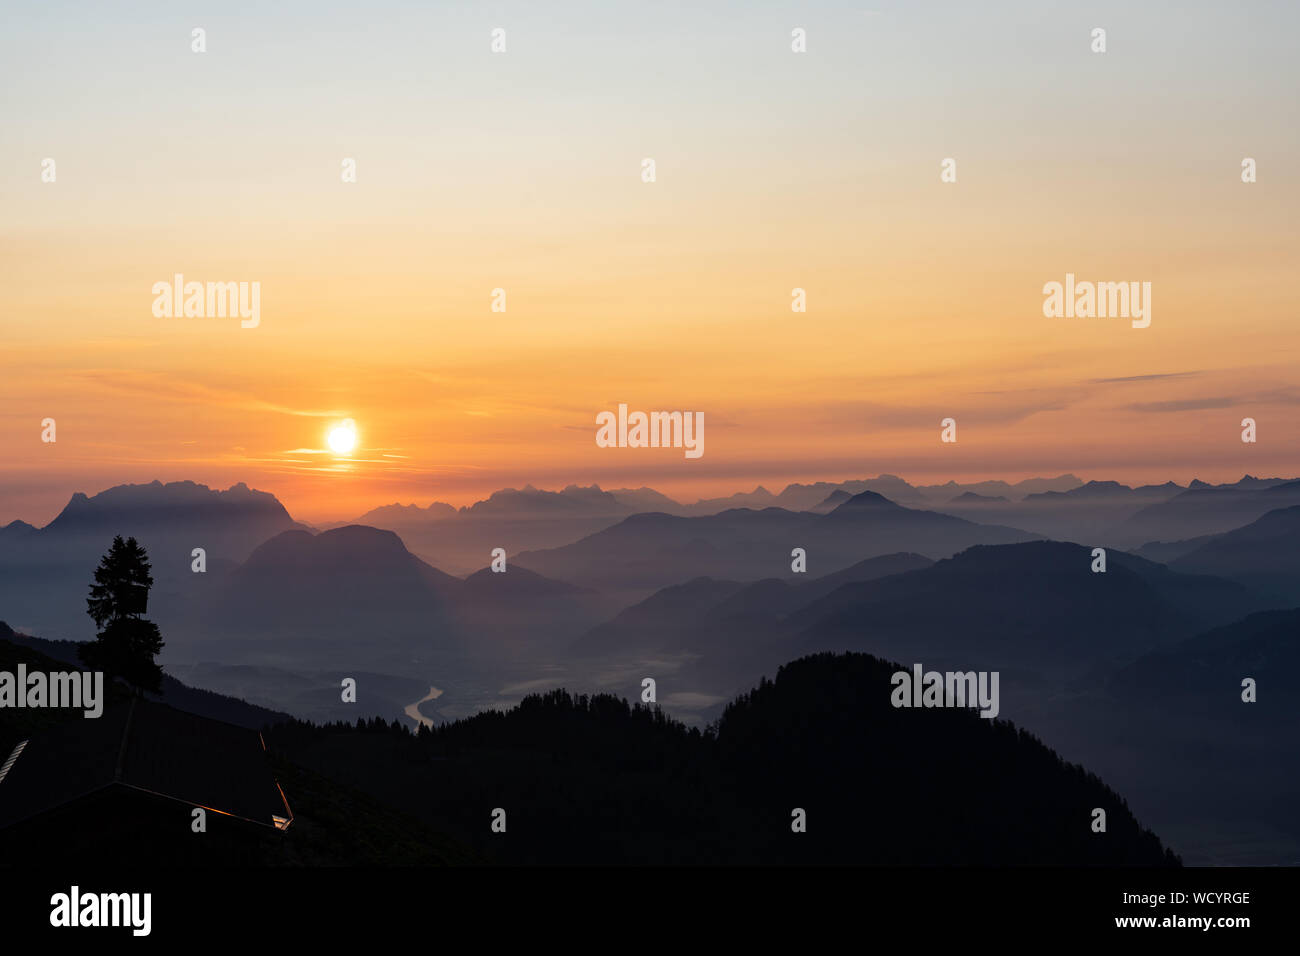 Sunrise over the tyrol alm high over the mountains scenery close up minimal silhouette Stock Photo